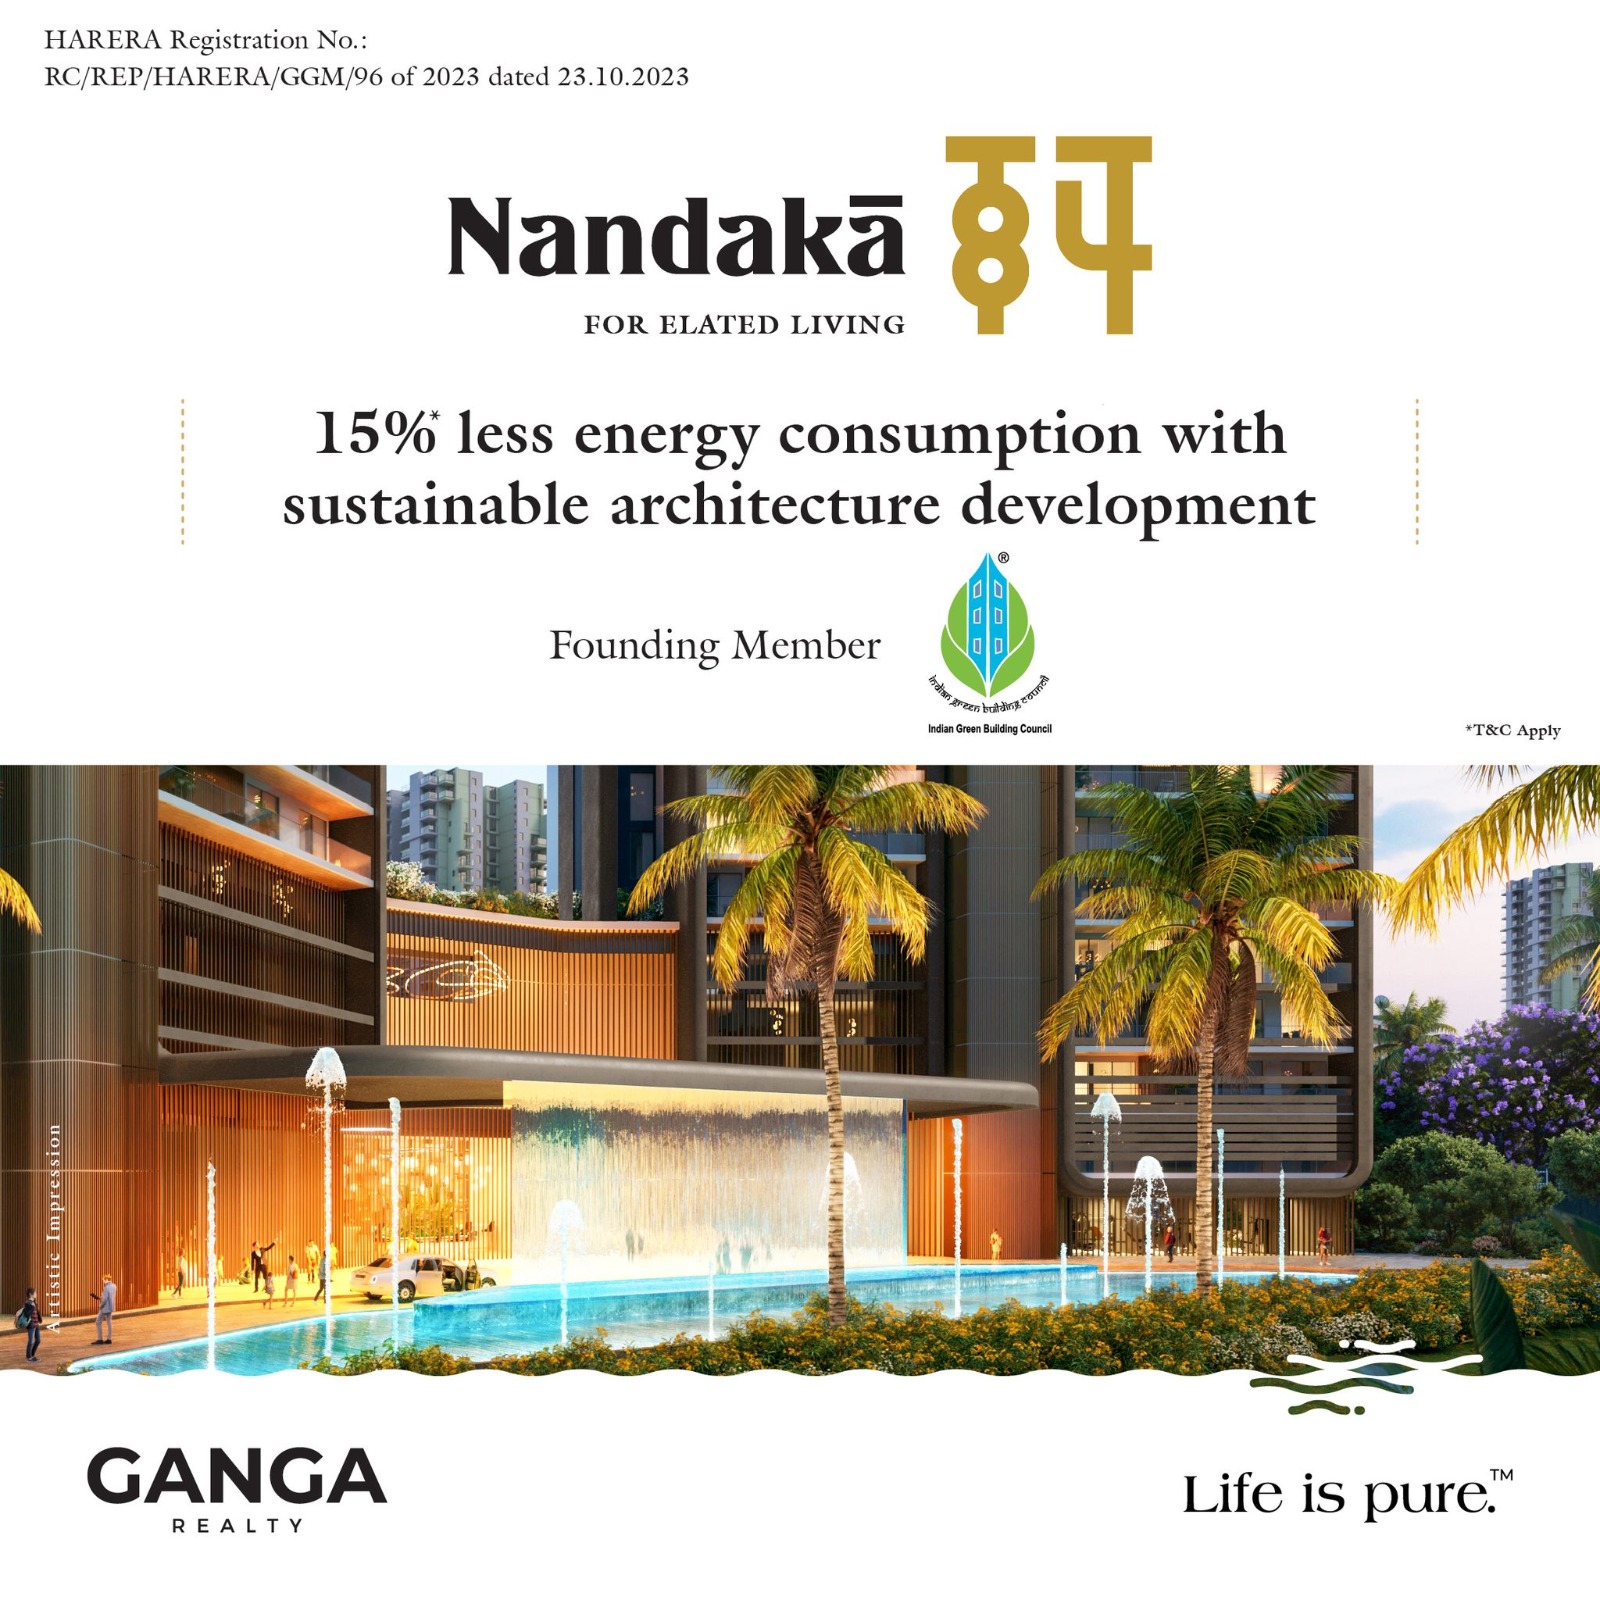 Nandaka 84 by Ganga Realty: Pioneering Sustainable Architecture for Elated Living Update